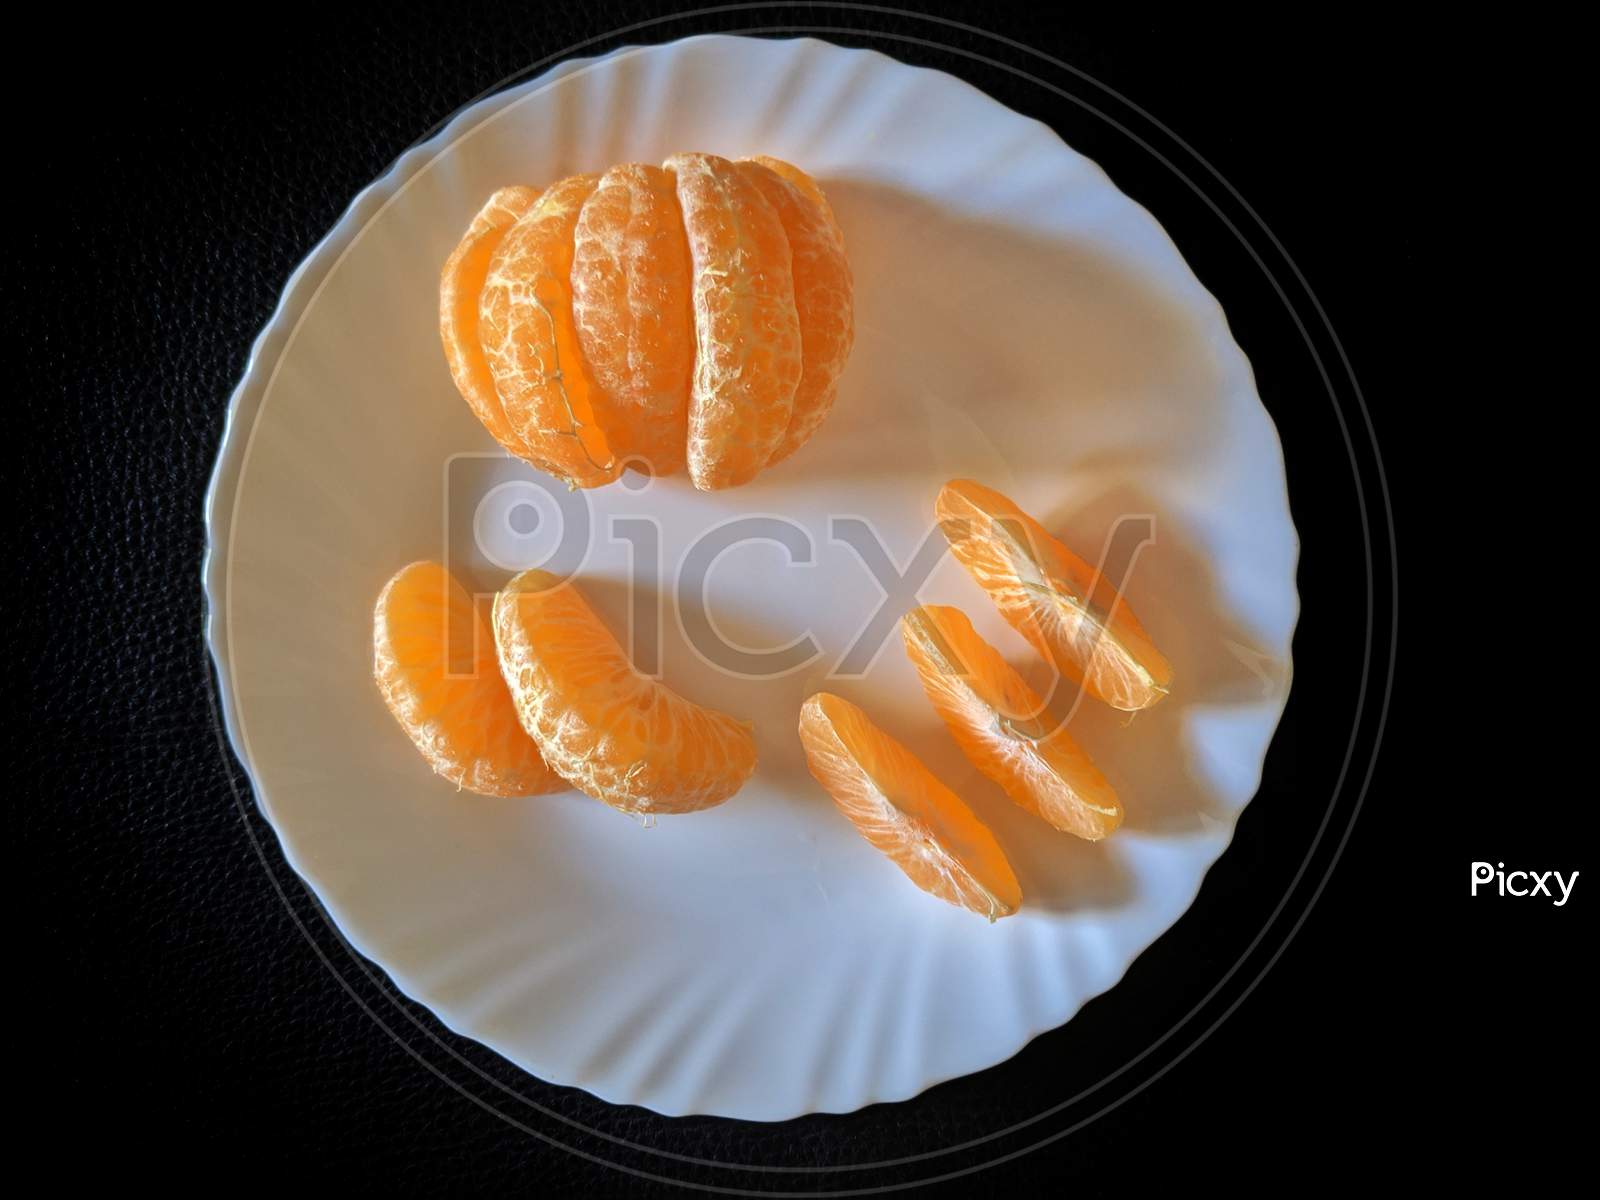 Freshly Cut Natural Healthy Juicy Organic Orange Slices Or Segments On A White Plate, Against A Black Wooden Table, Flat Lay Composition With No People,